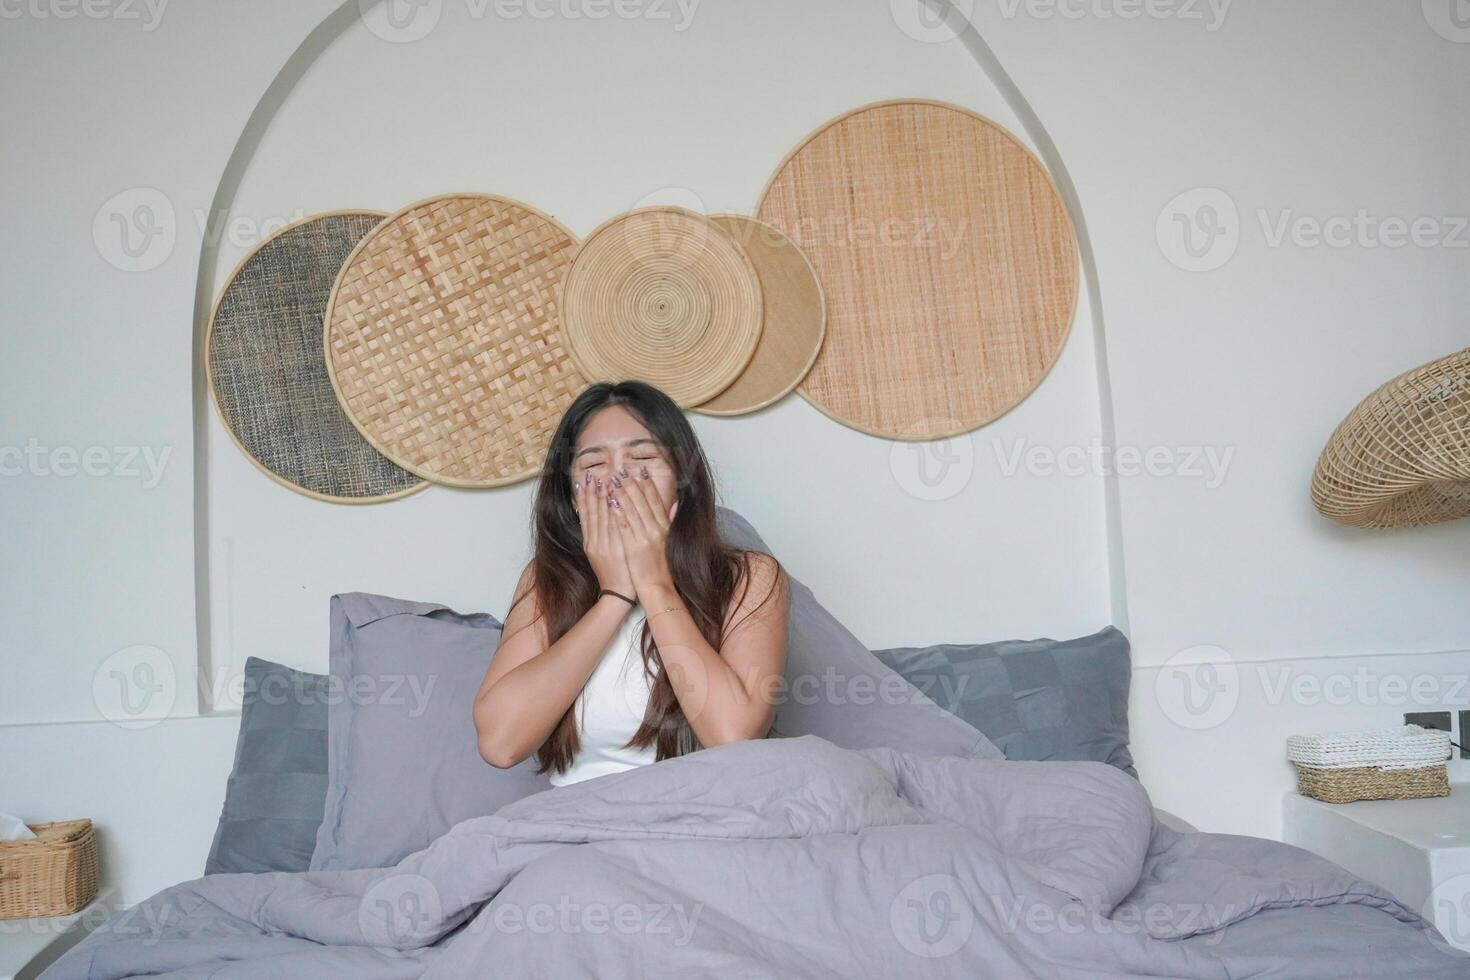 Sleepy Asian young woman yawning and raising hand waking up in early morning after deep sleep, peaceful morning holiday concept photo